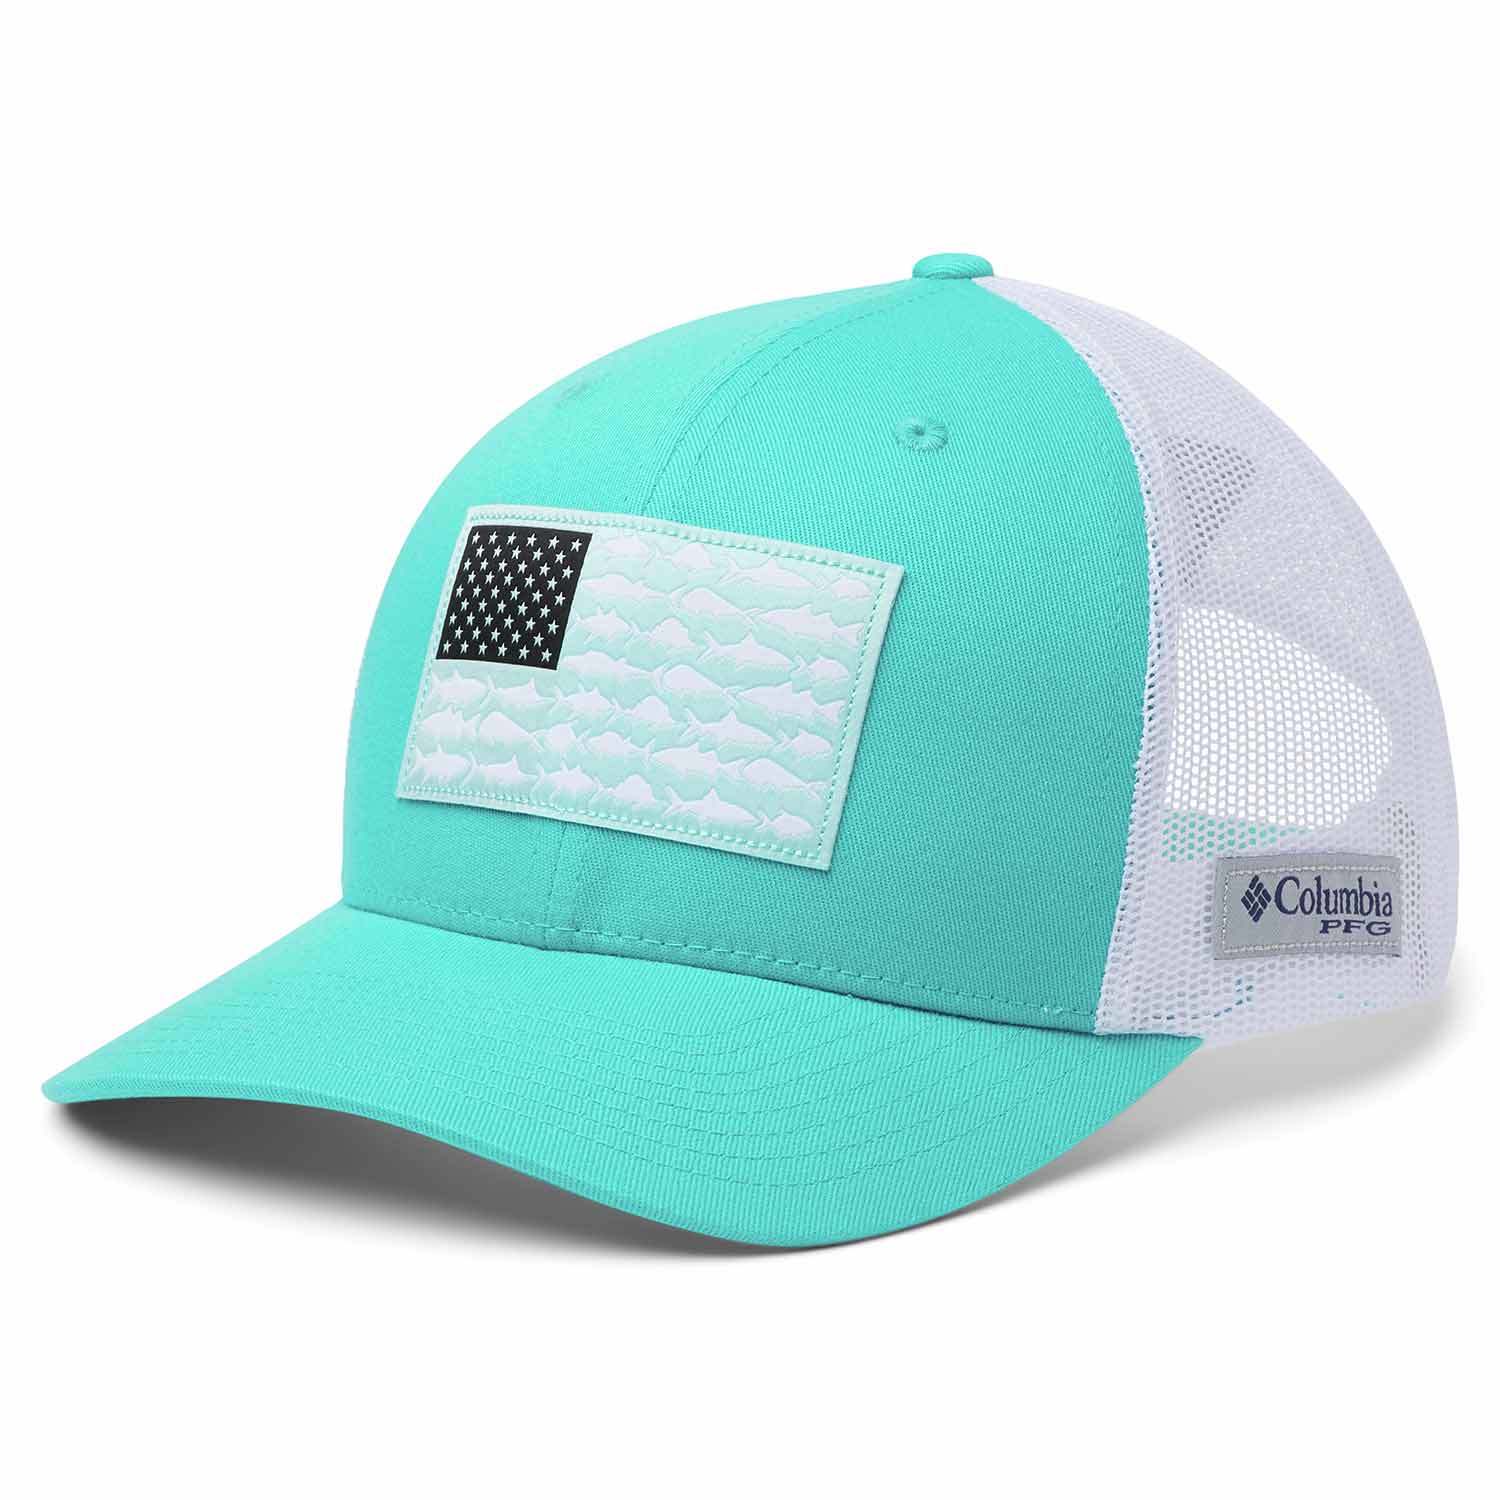 Columbia Blue & White Snapback - Tunabelly Offshore